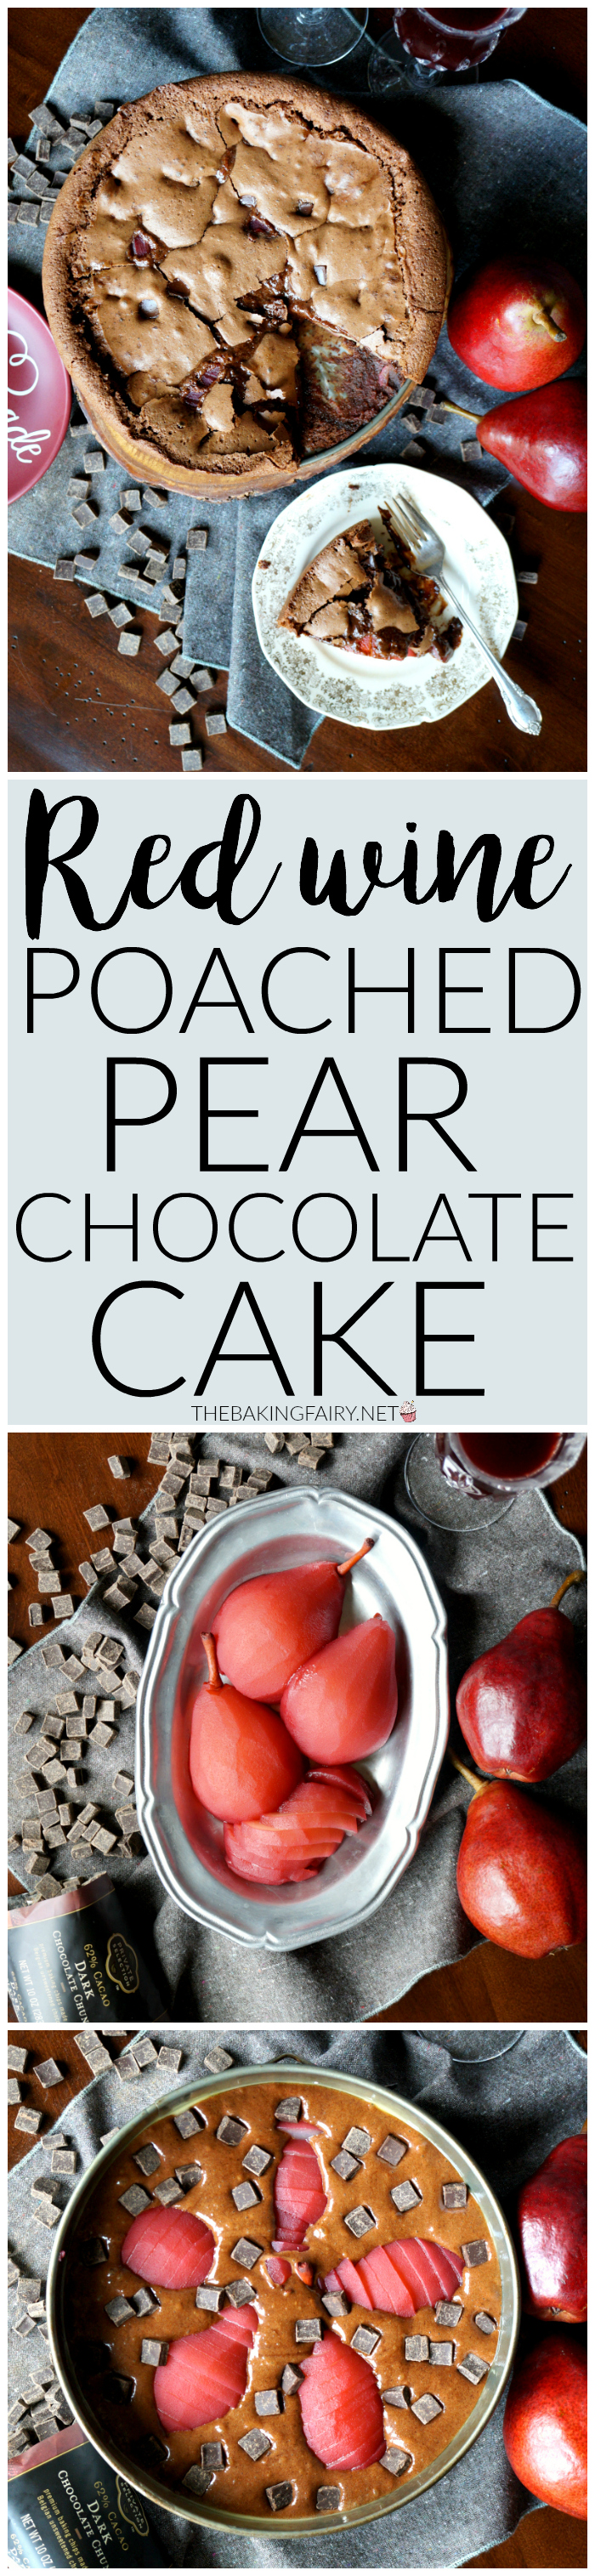 red wine poached pear chocolate cake | The Baking Fairy